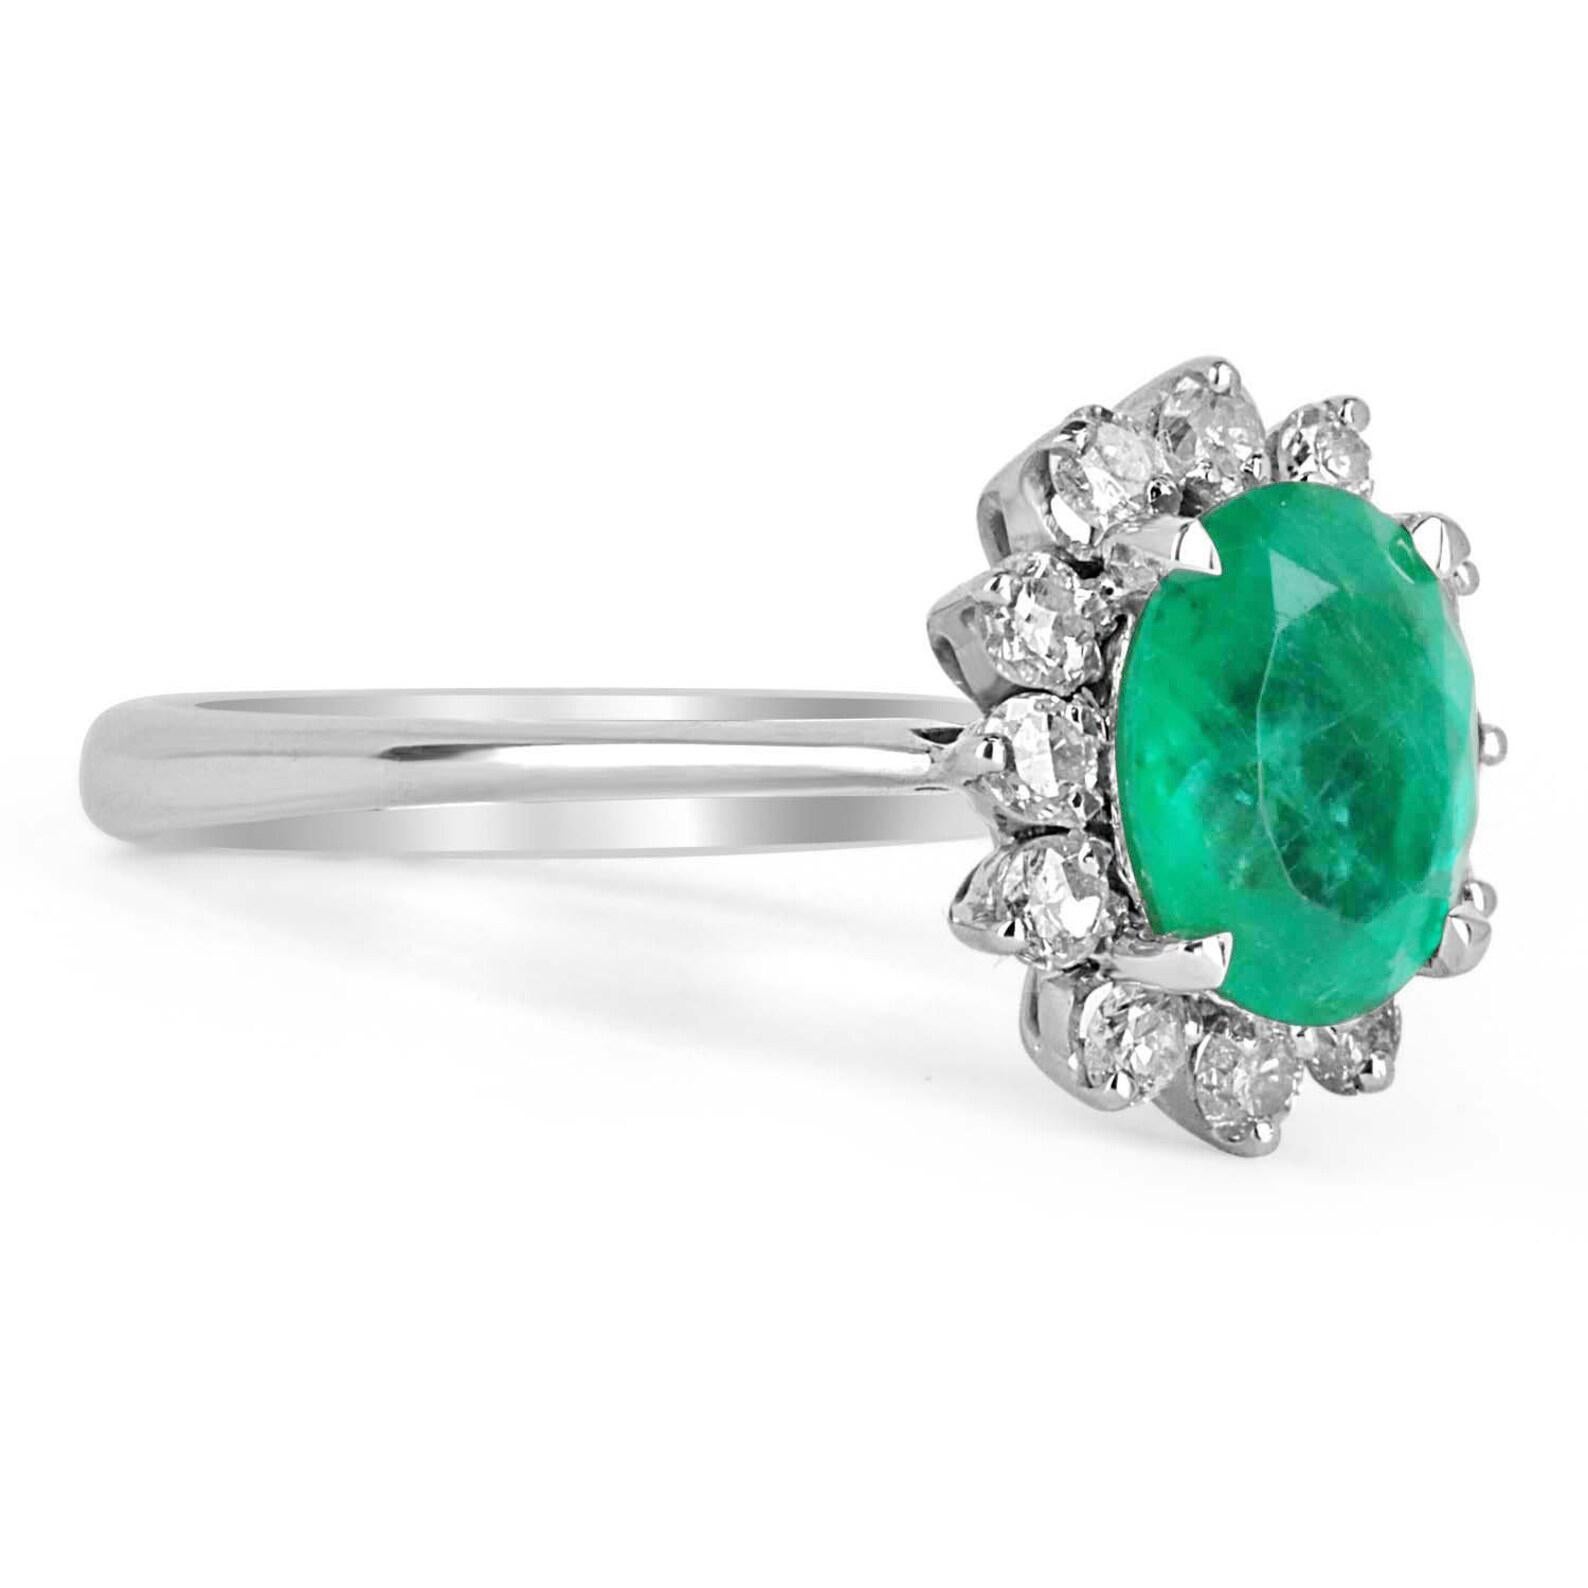 Featured is a vibrant Colombian emerald and diamond halo ring. The ring is made in solid 14k white gold. A beautiful oval emerald is the center of attention as it displays a soothing medium green color and excellent eye clarity. Diamonds halo around